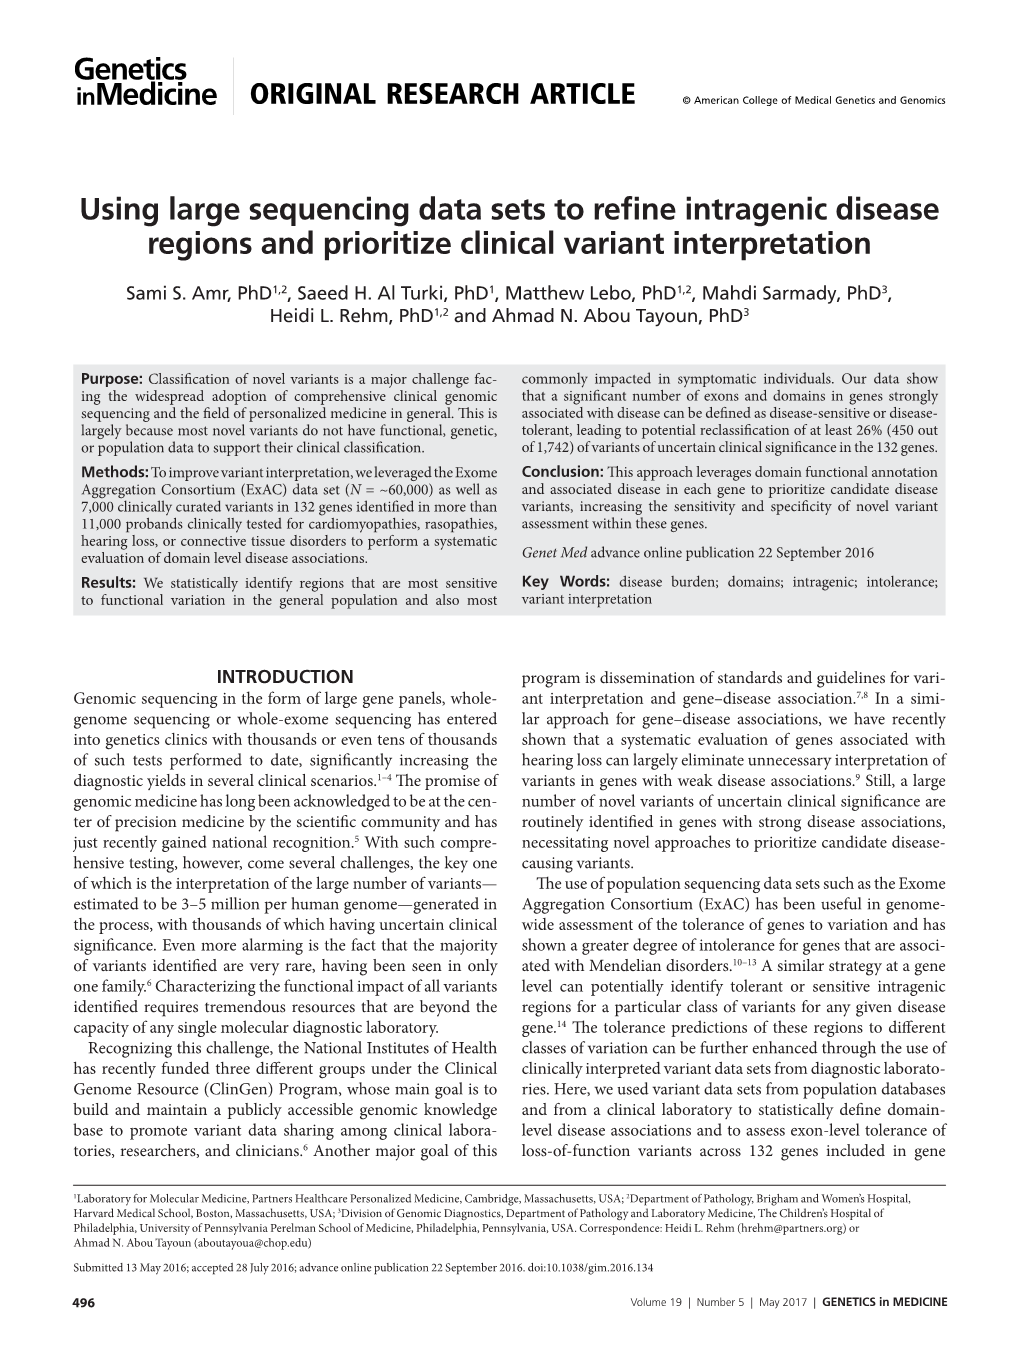 Using Large Sequencing Data Sets to Refine Intragenic Disease Regions and Prioritize Clinical Variant Interpretation